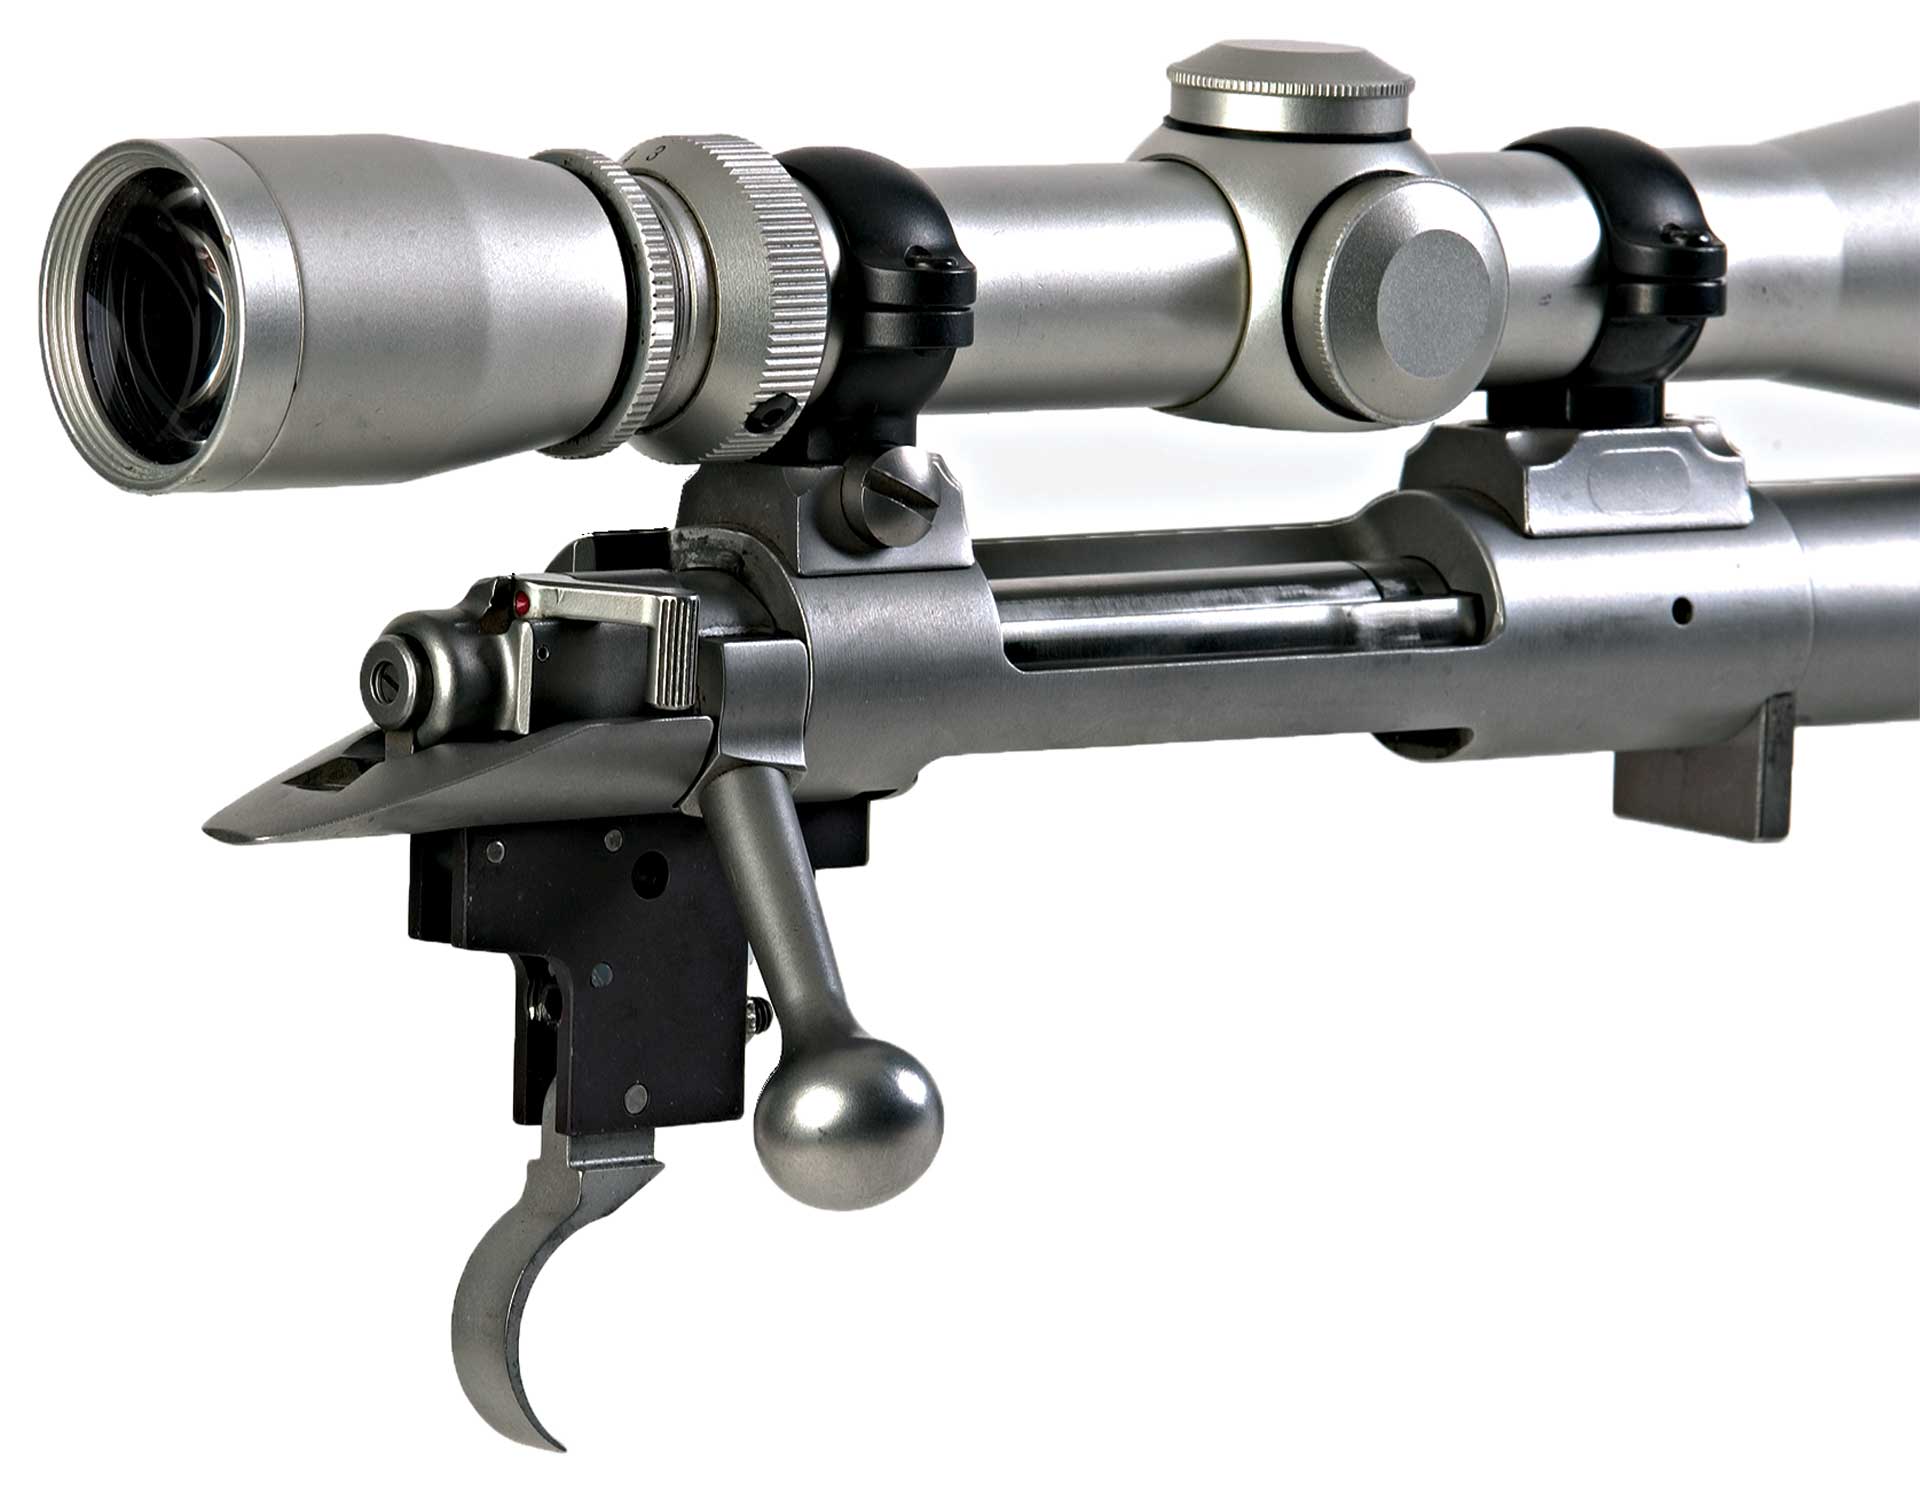 barreled action receiver rifle bolt-action metal stainless steel silver color riflescope